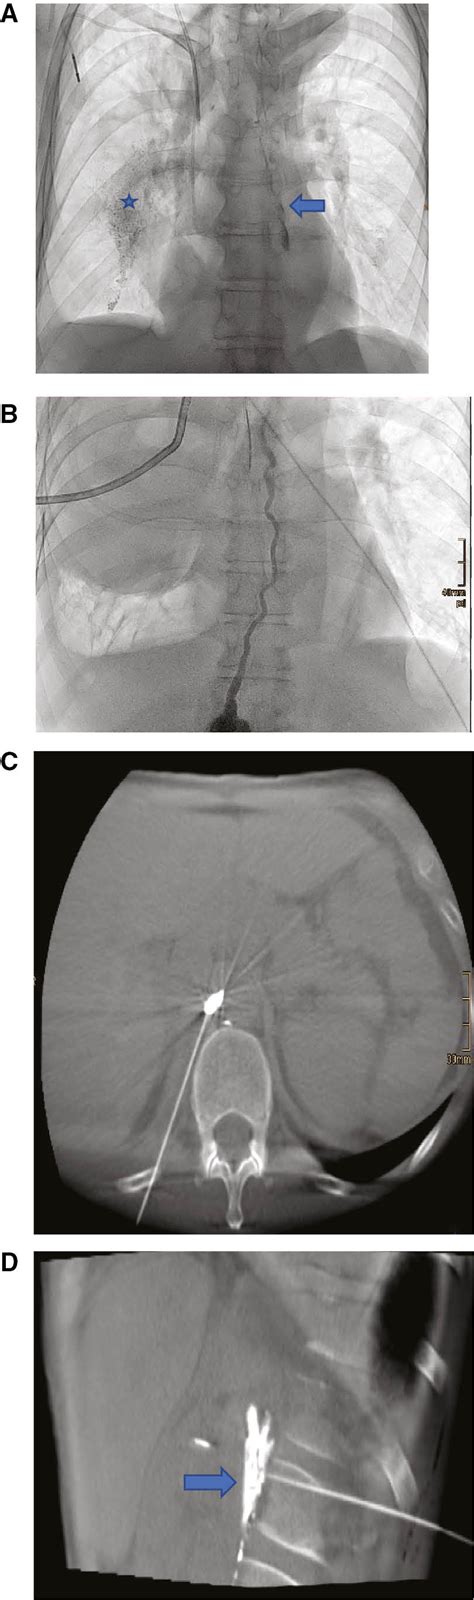 Ultrasound Guided Lymphangiography And Interventional Embolization Of